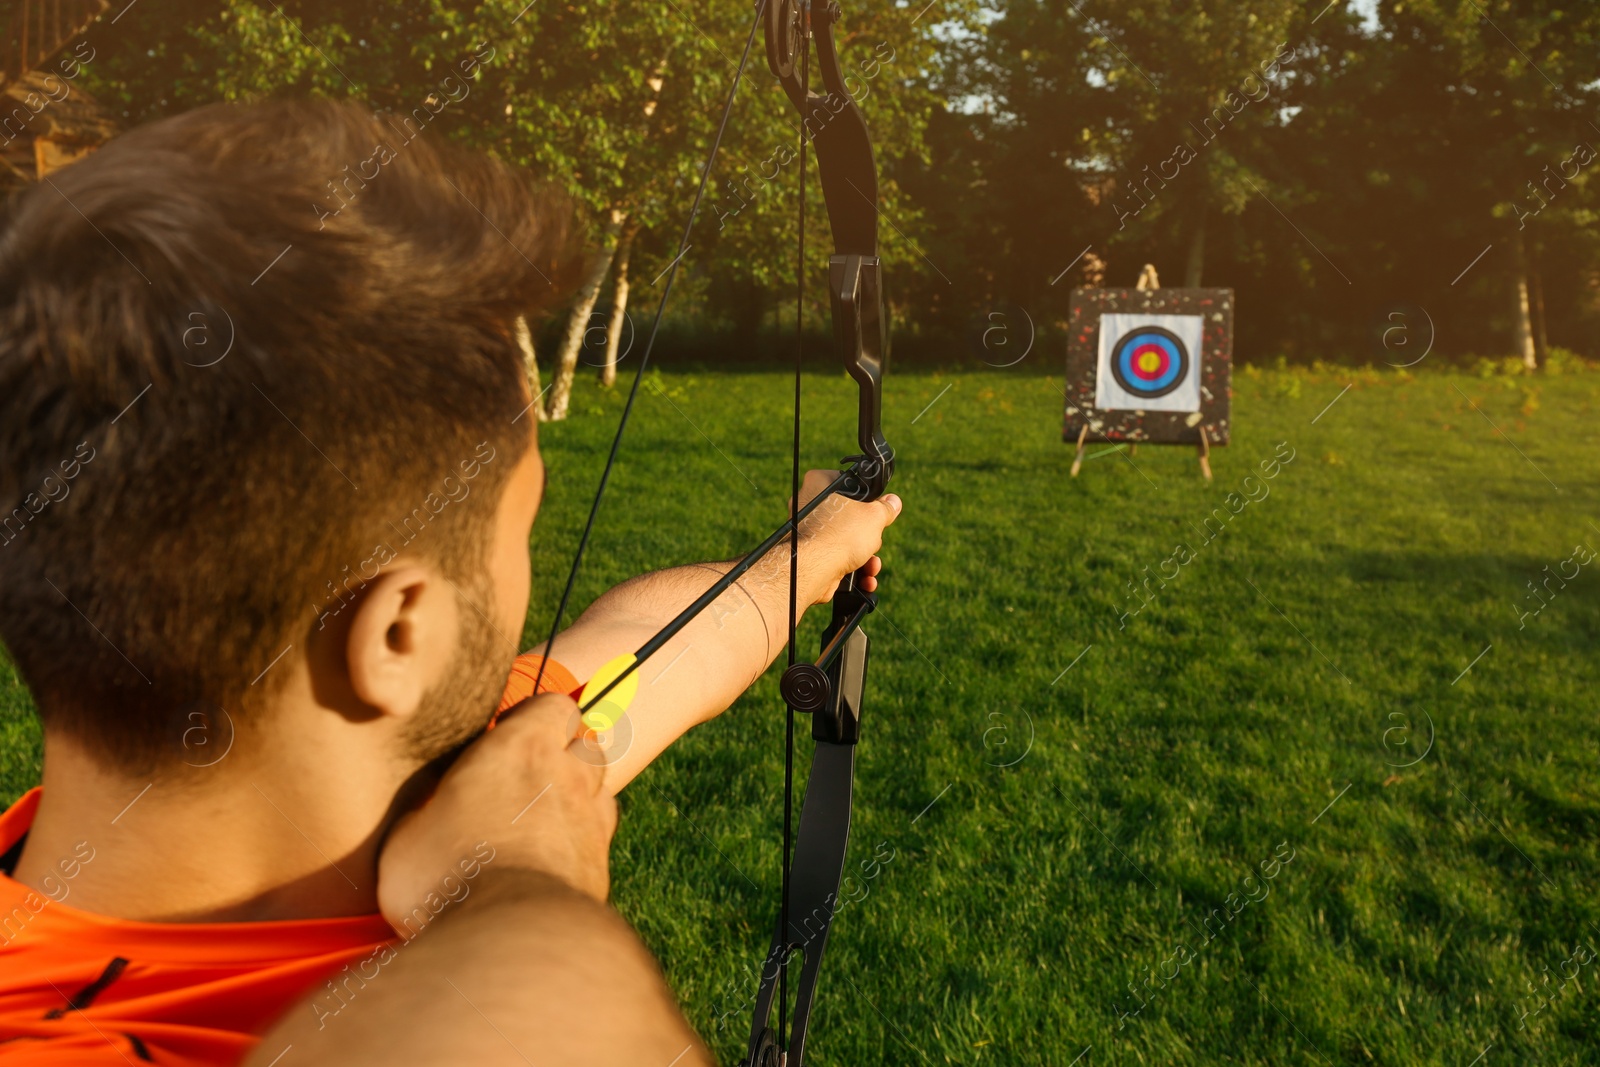 Photo of Man with bow and arrow aiming at archery target in park, back view